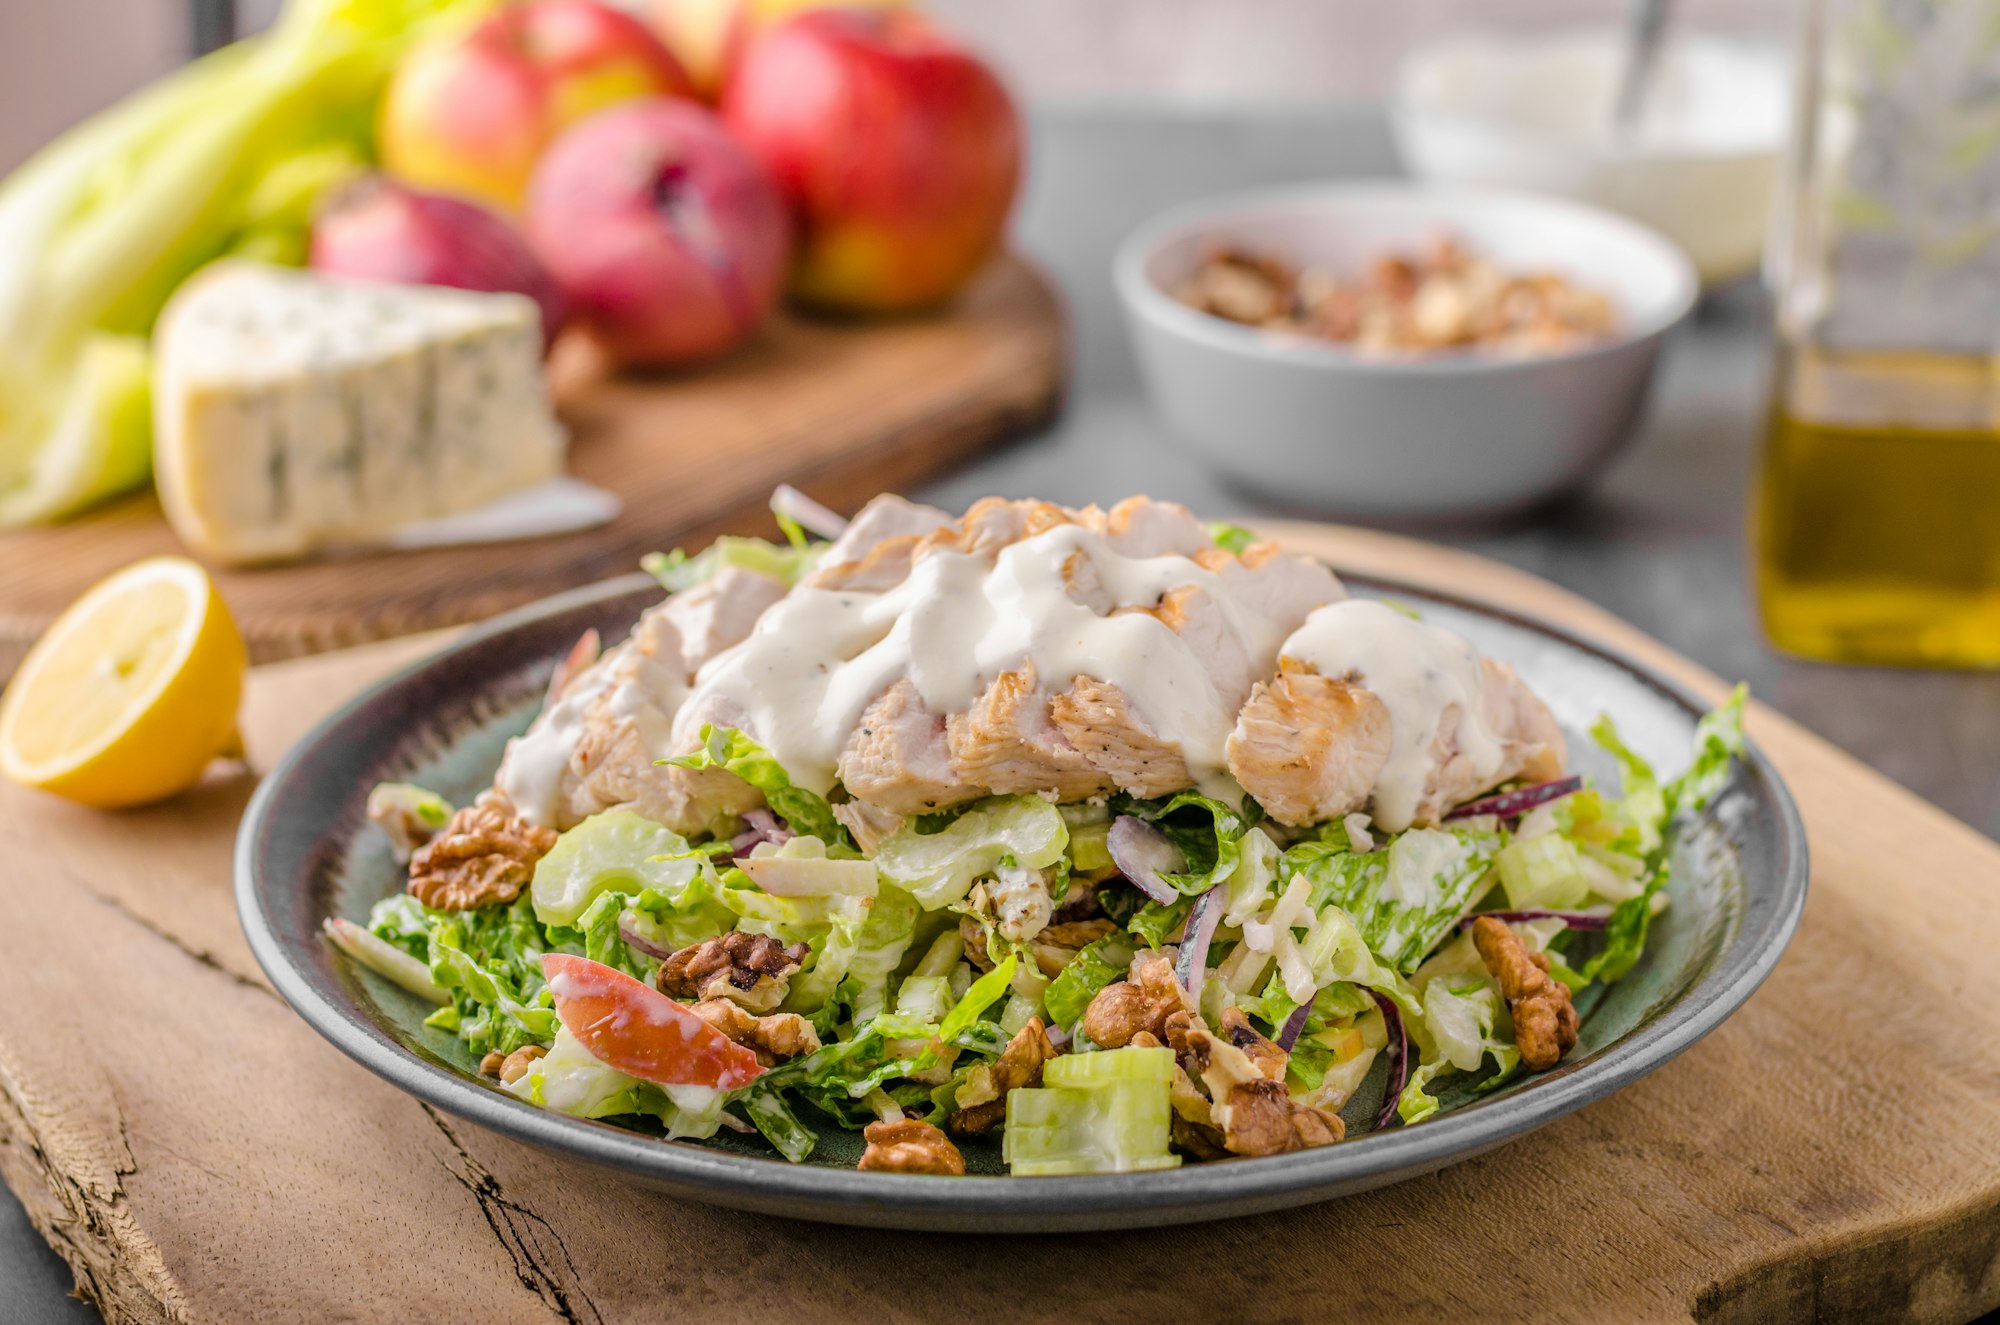 Waldorf salad with grilled chicken